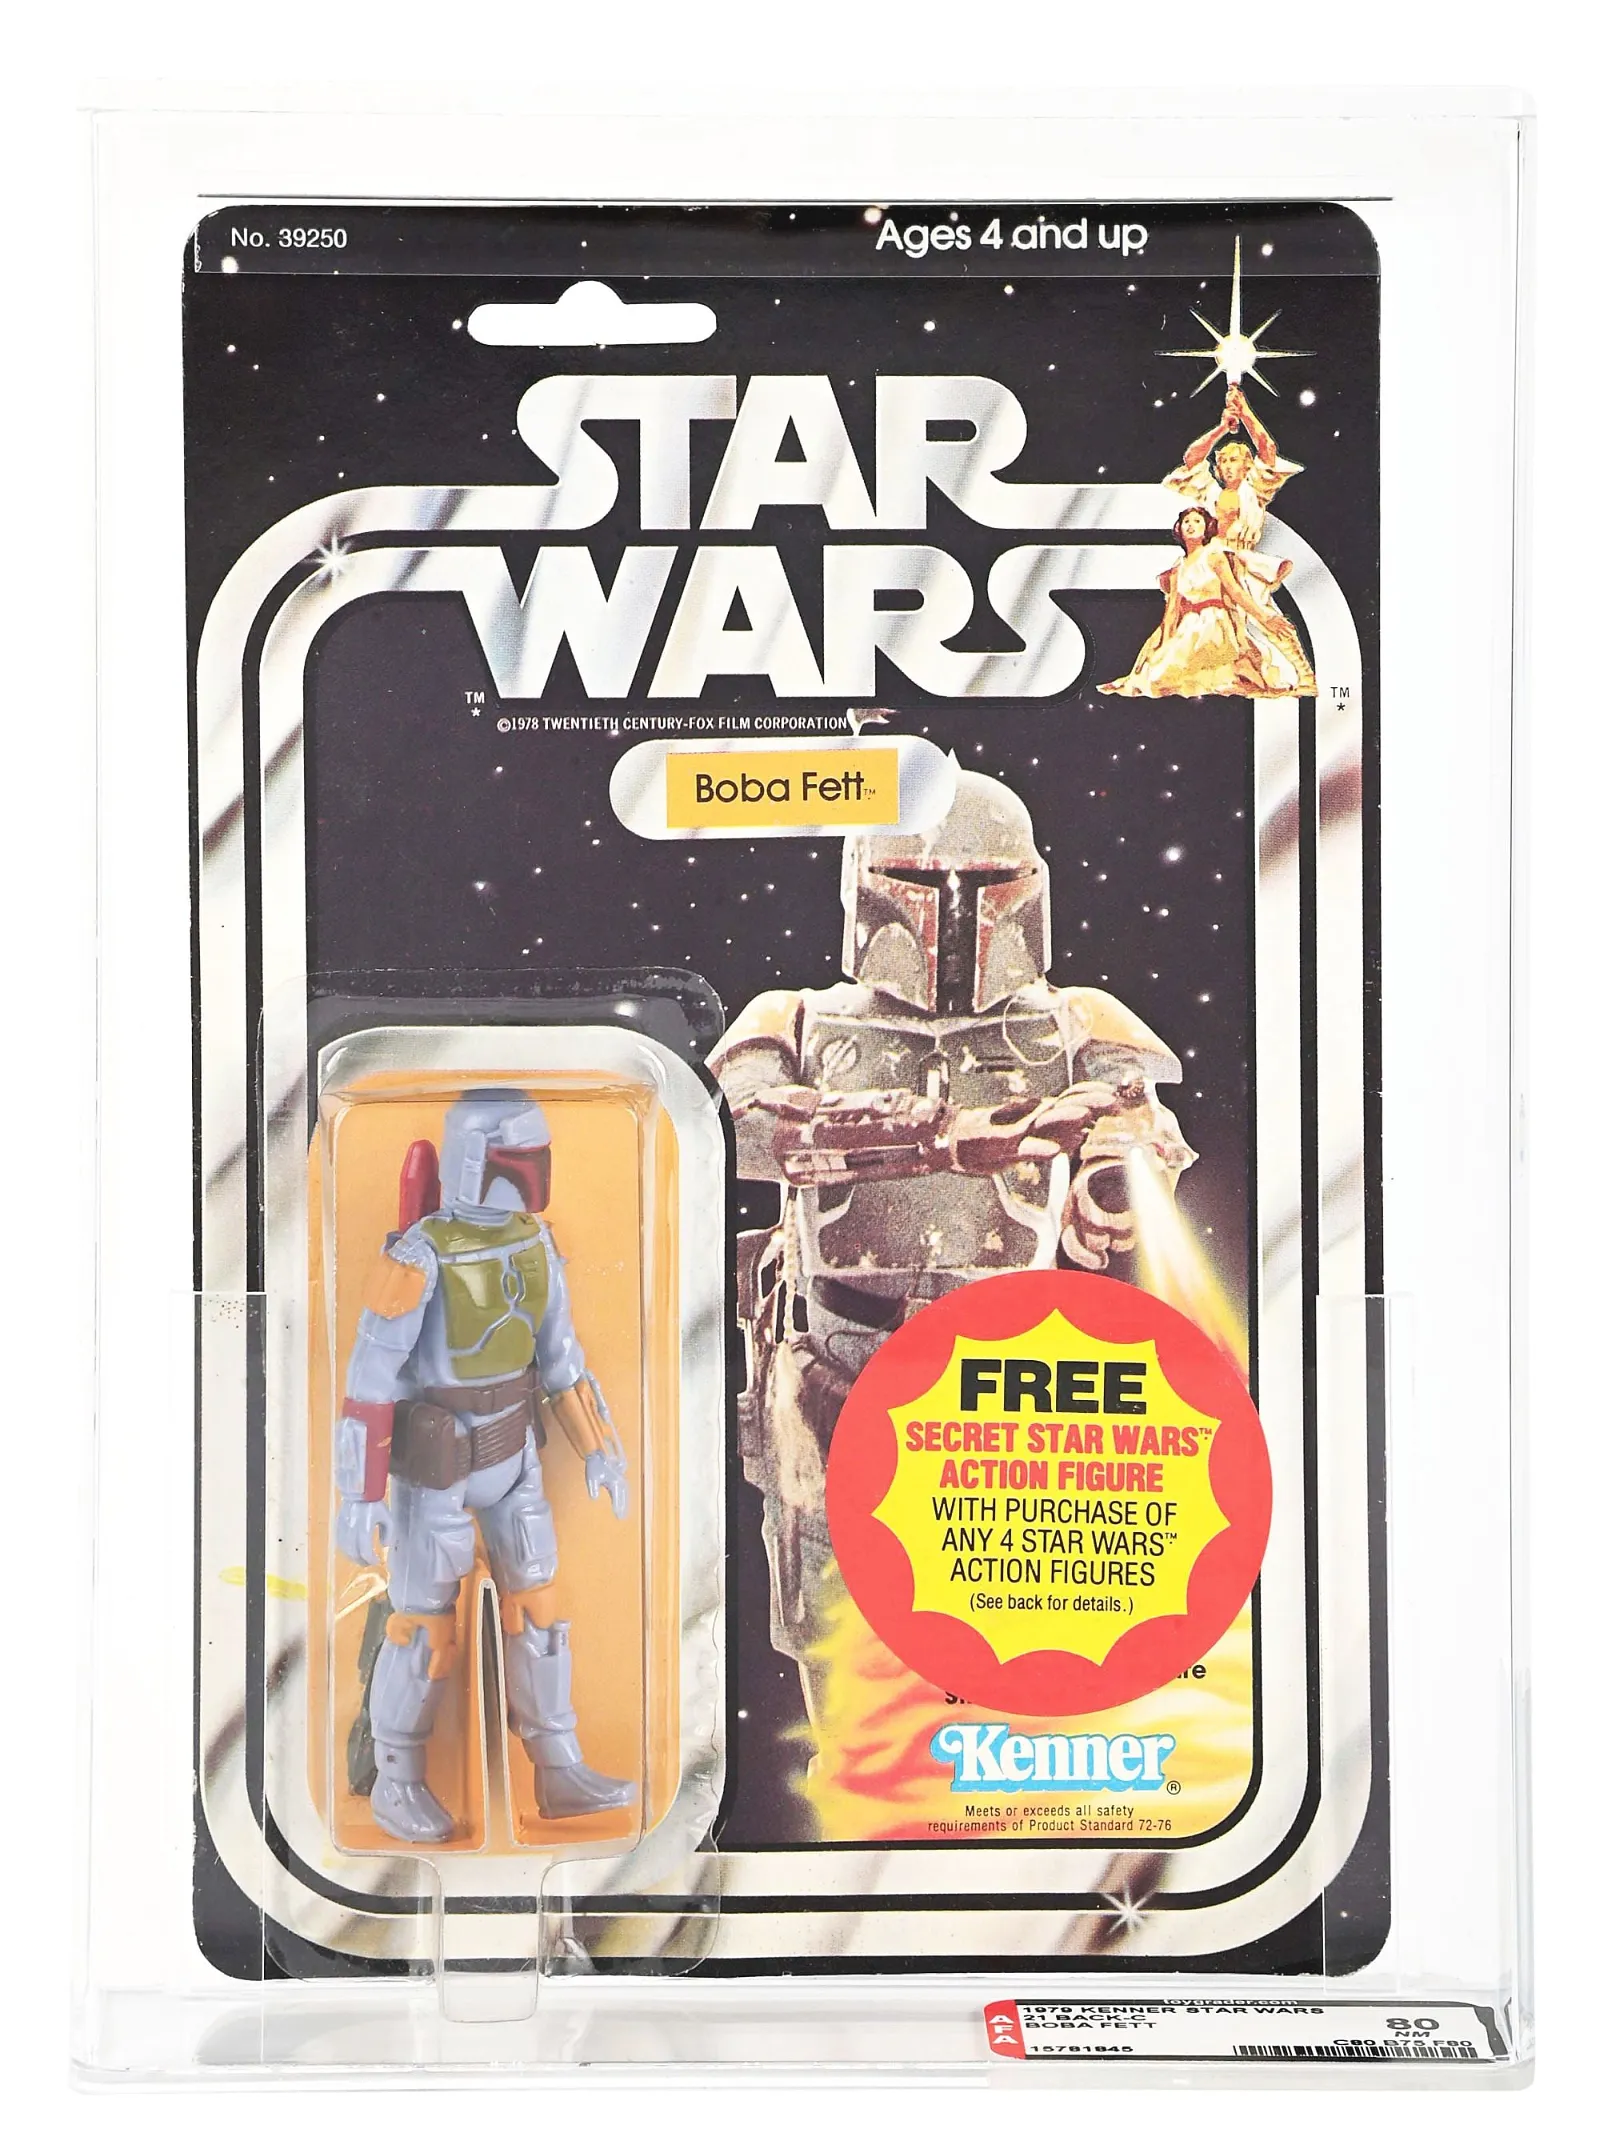 Kenner Star Wars Boba Fett 21 Back-C action figure, which sold for $6,500 ($7,995 with buyer’s premium) at Morphy.